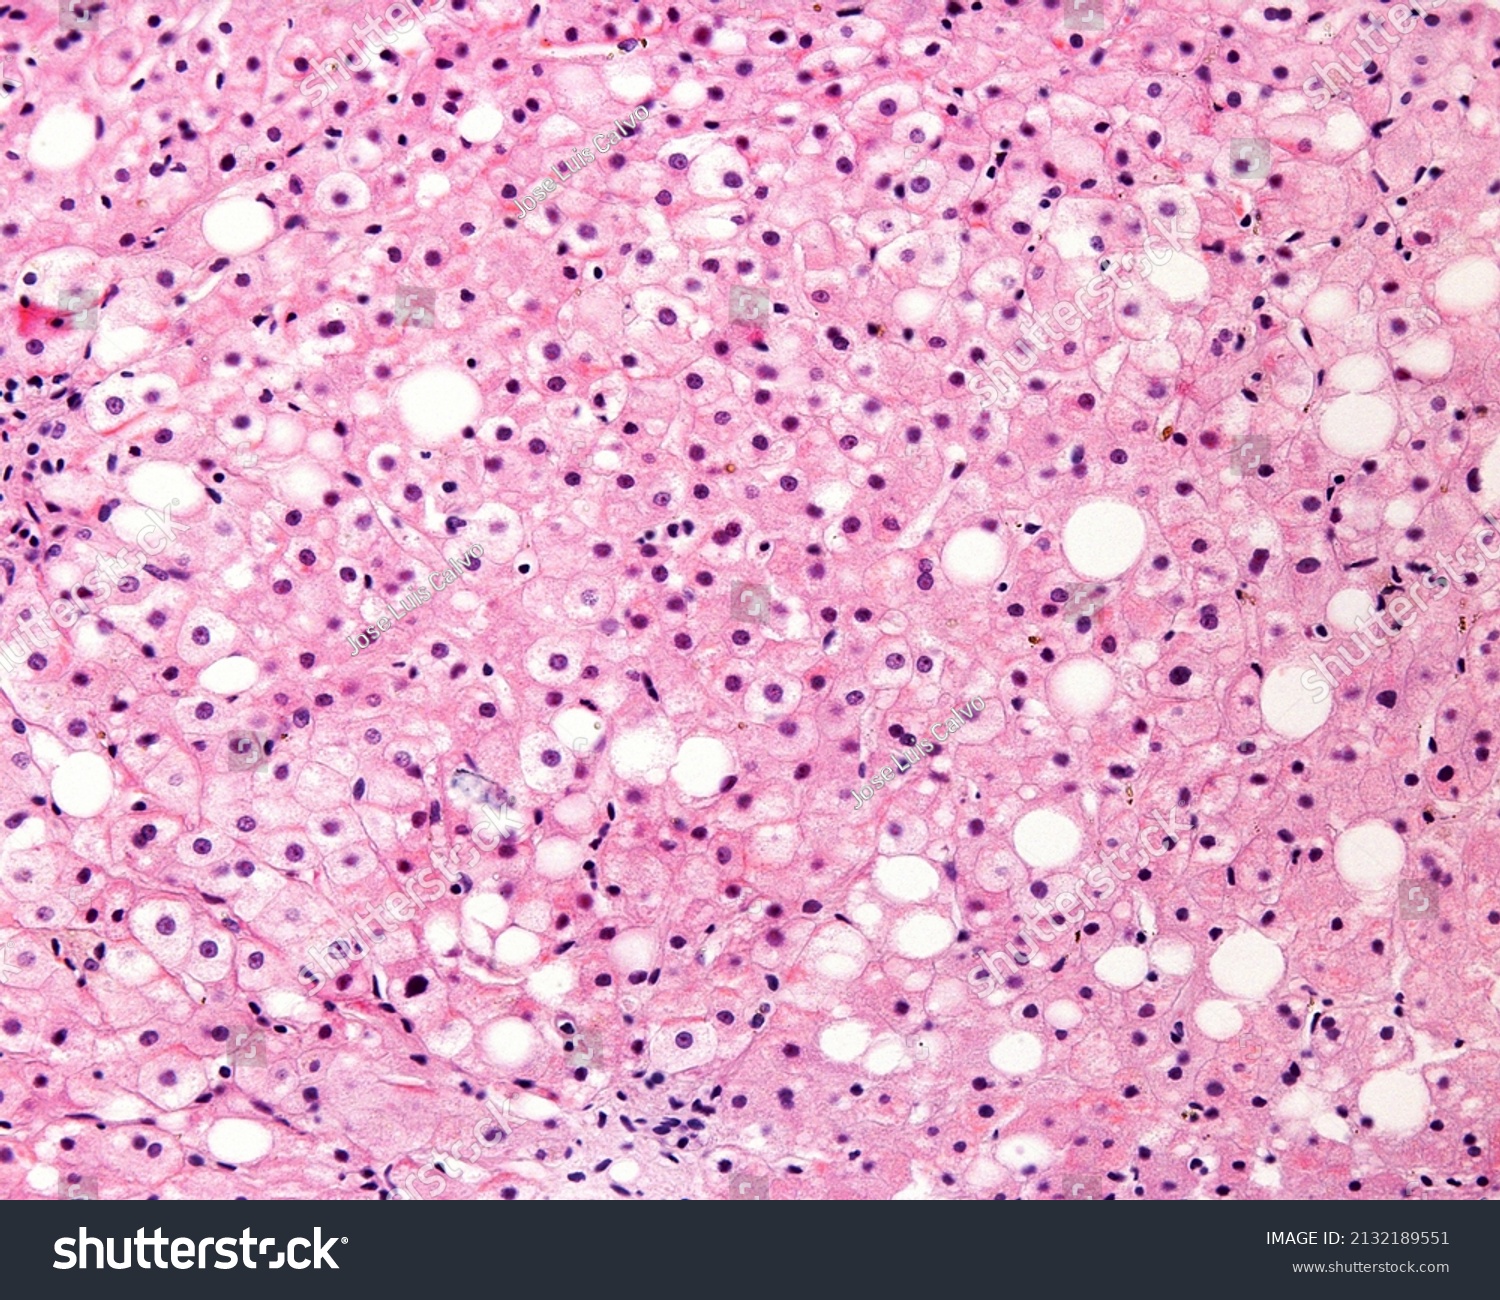 Human liver affected by macrovesicular steatosis (fatty degeneration). Many hepatocytes show a big single fat droplet that pushes the nucleus and cytoplasm to the periphery of the cell. #2132189551